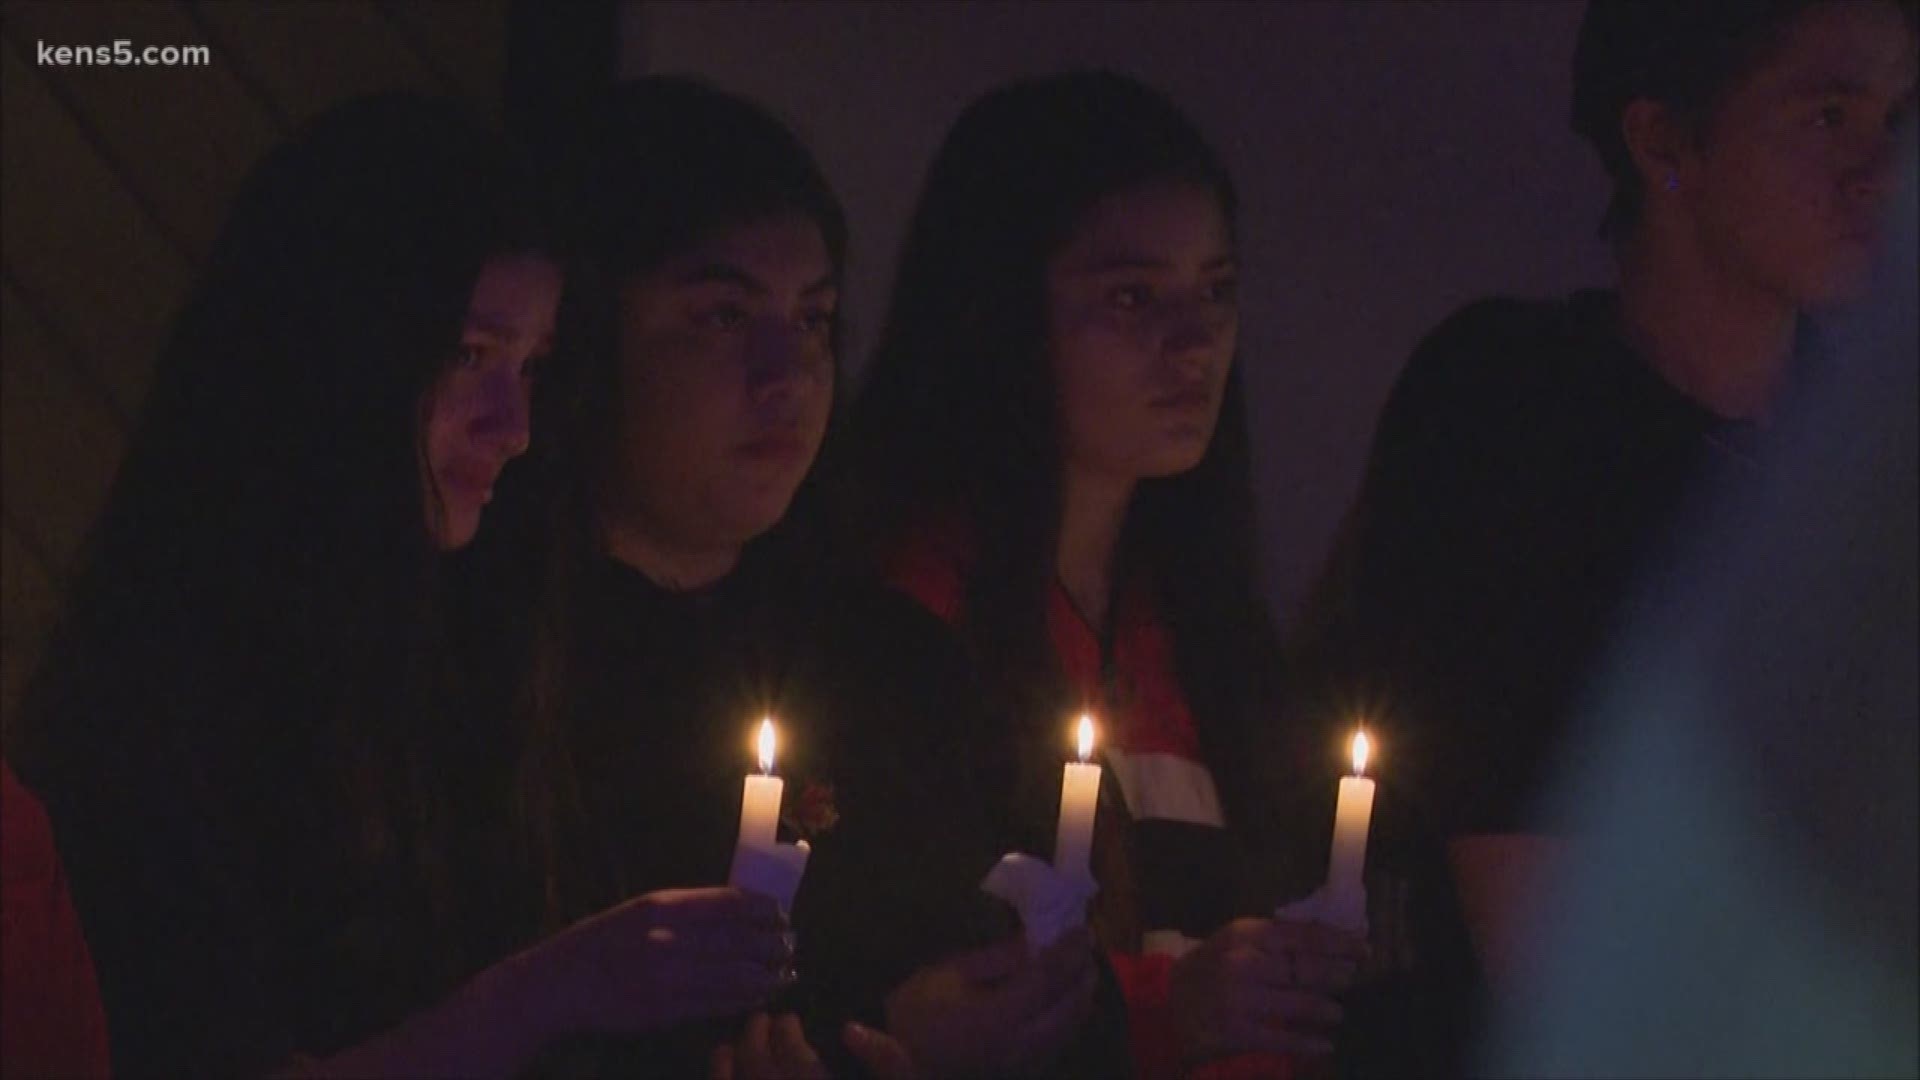 Friends and family gathered on Wednesday night at a service in Stone Oak to remember 15-year-old Alonso Jones.